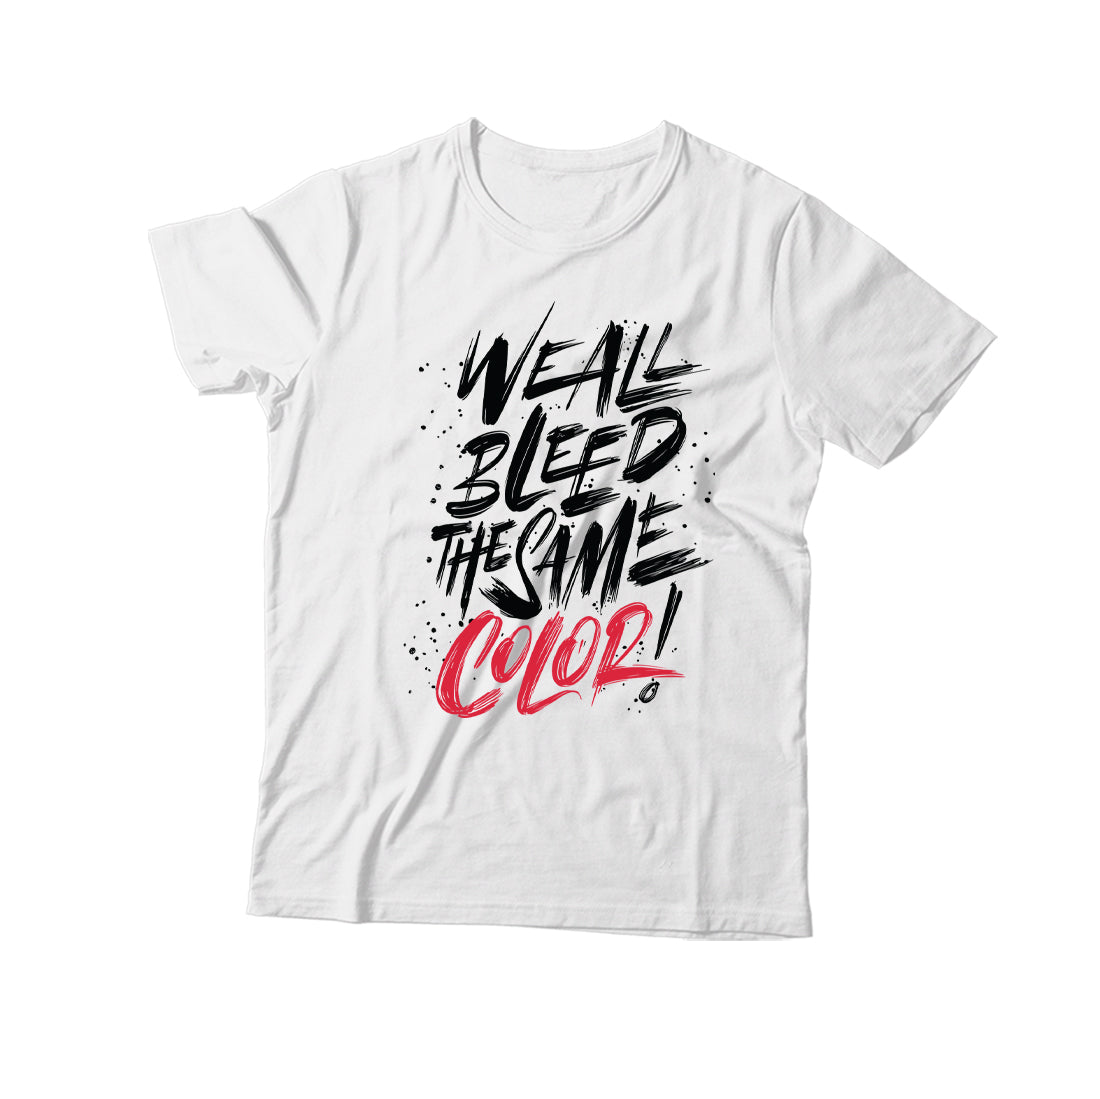 We All Bleed The Same Color T-Shirt - White/Black